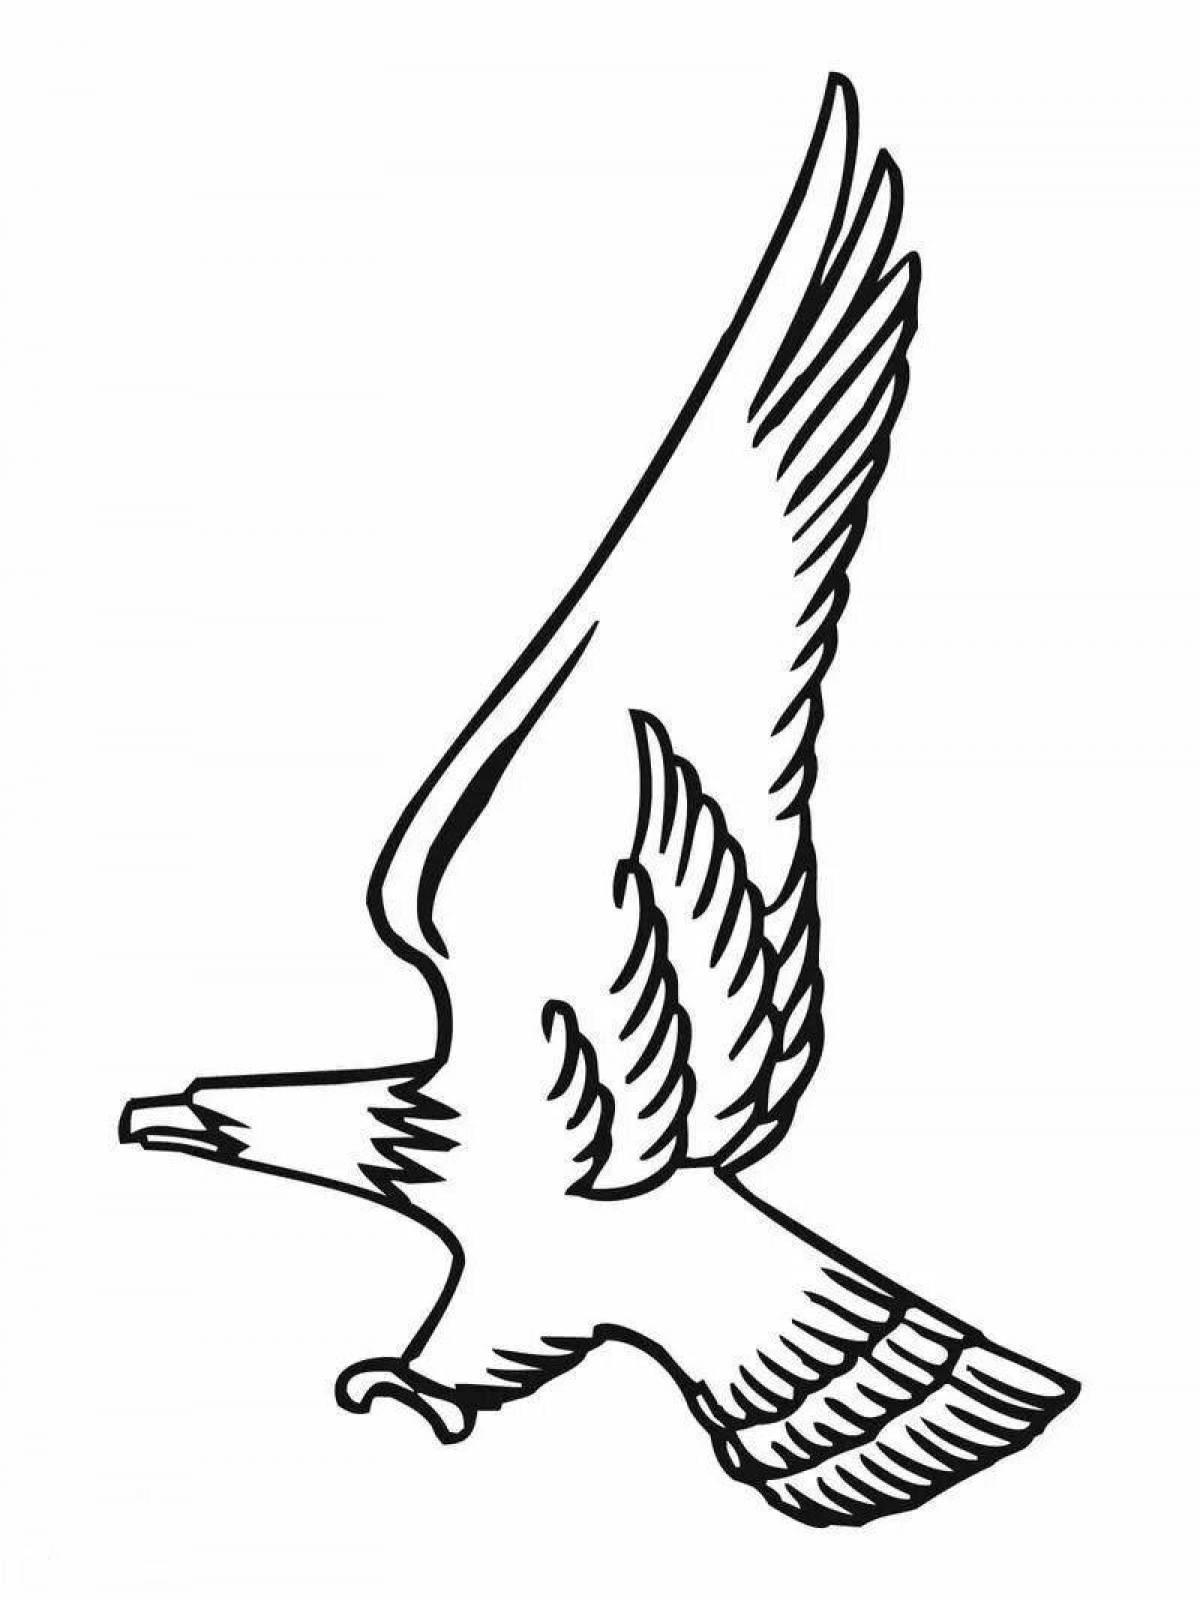 Coloring book dazzling white-tailed eagle